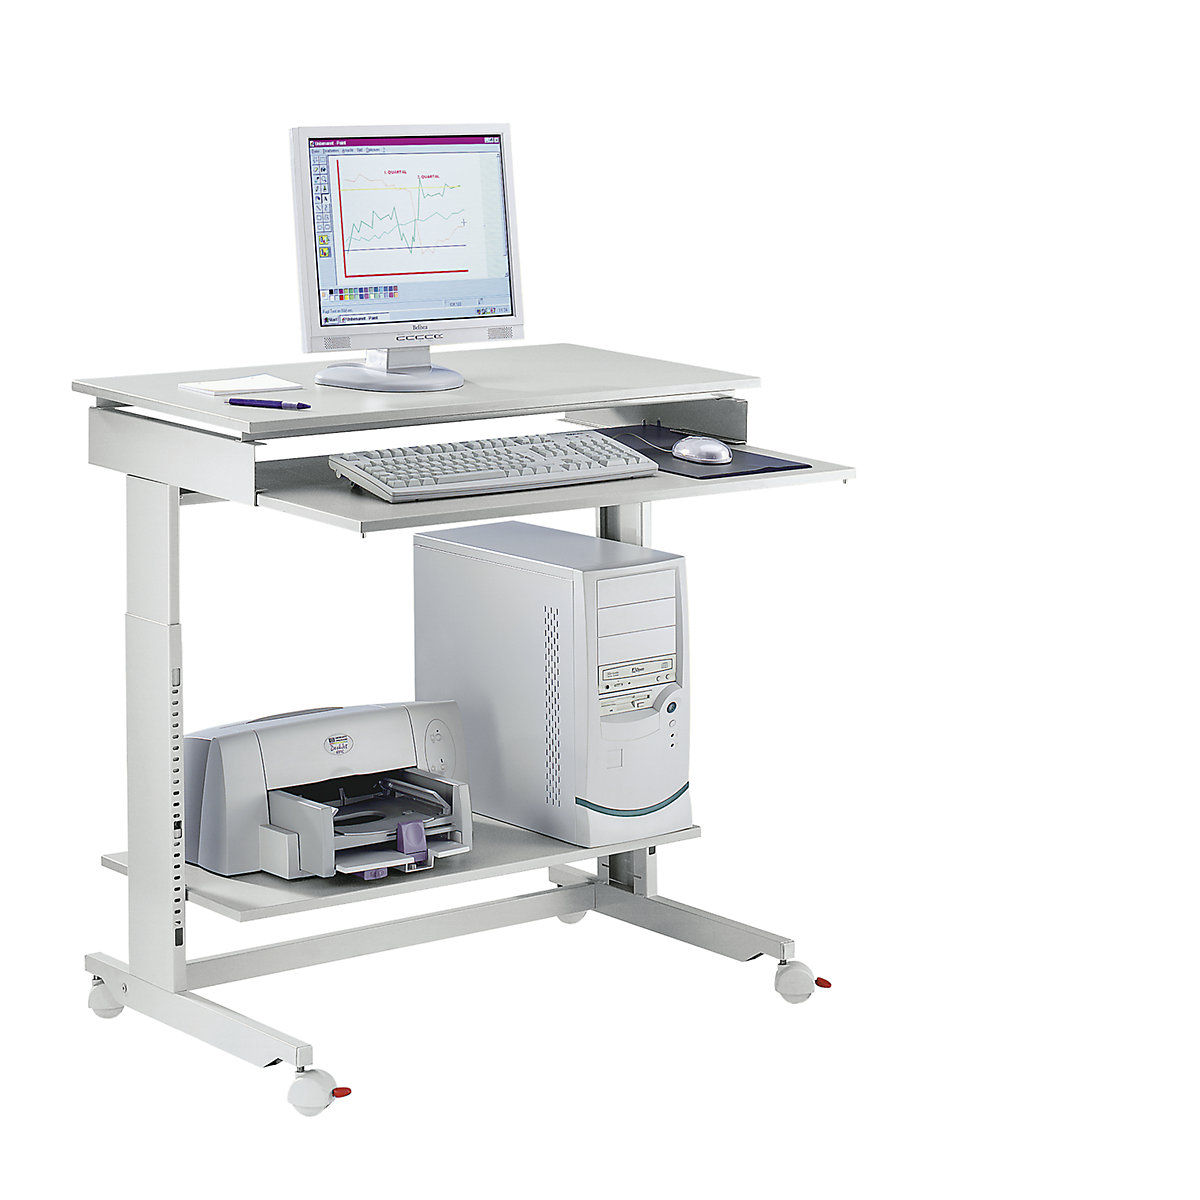 PC workstation – Twinco, width x depth 900 x 500 mm, height adjustable from 715 – 1075 mm